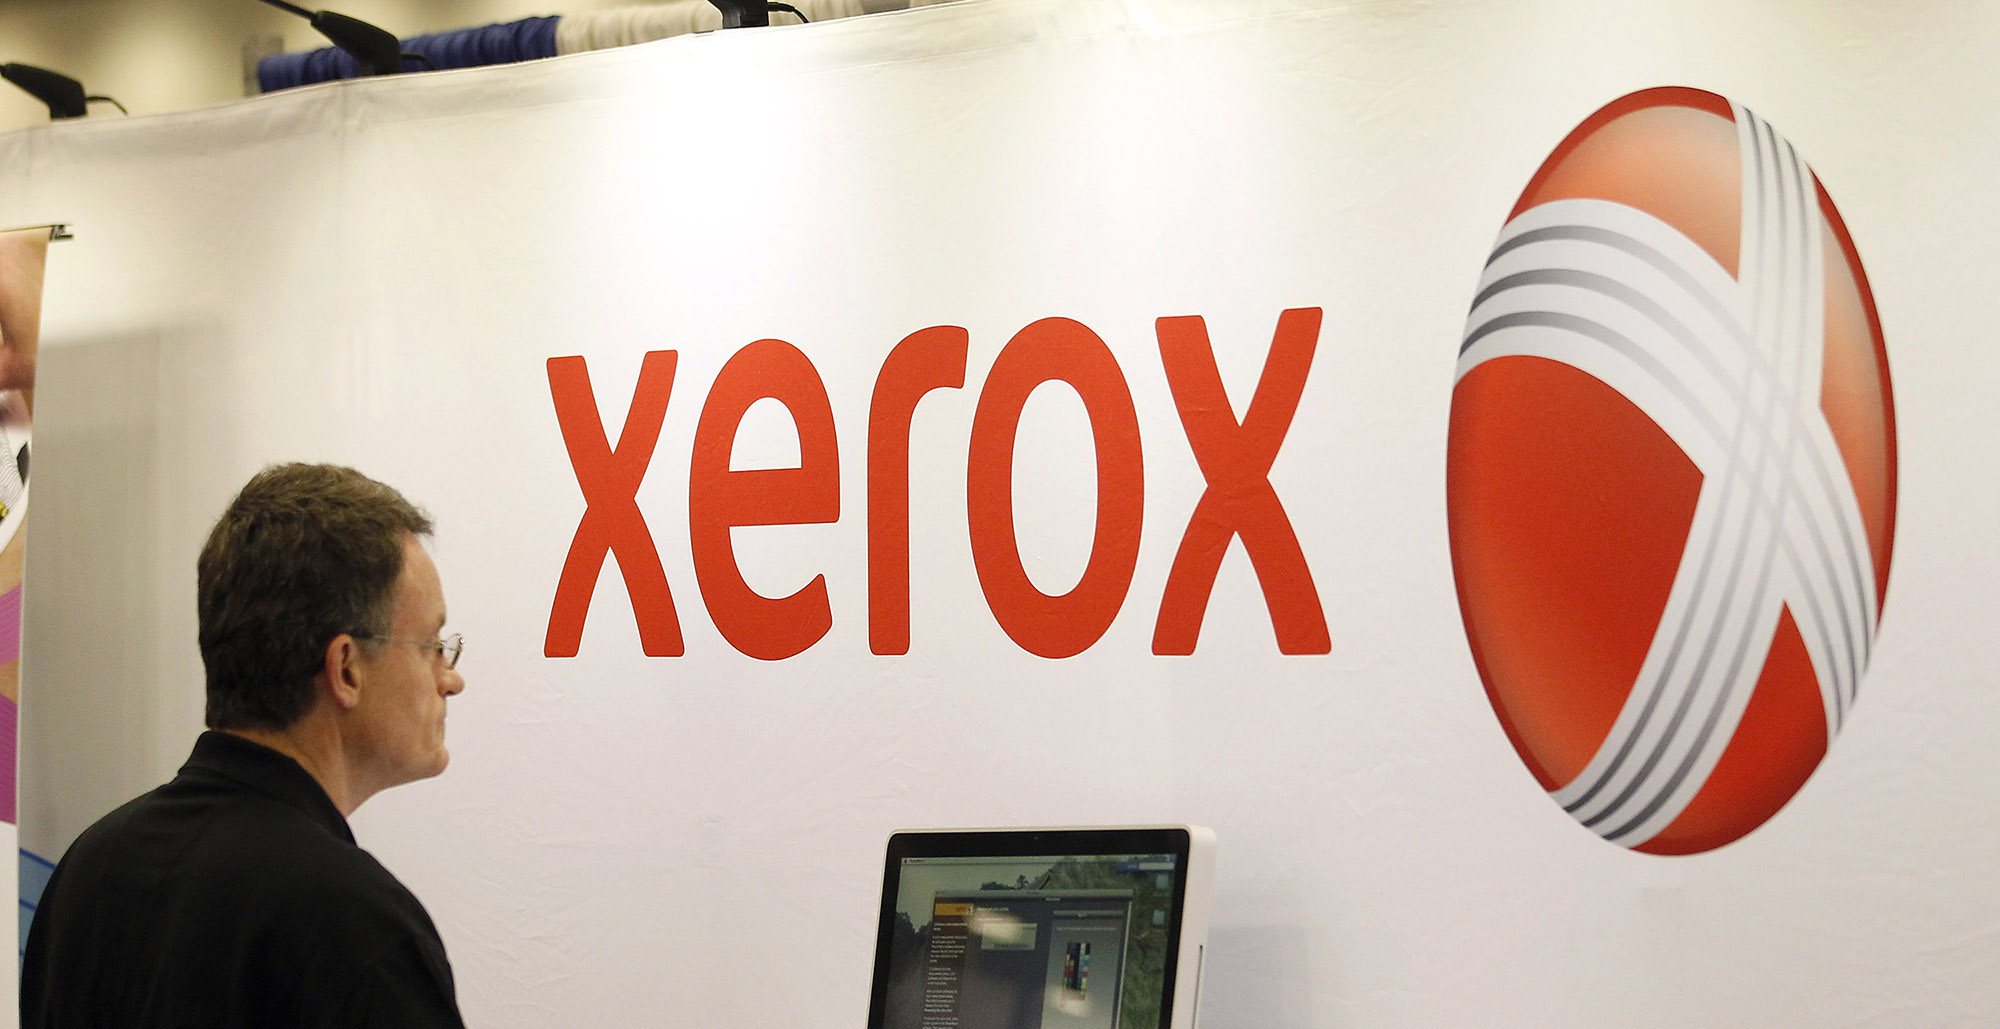 The Xerox logo is displayed at their booth at a conference.